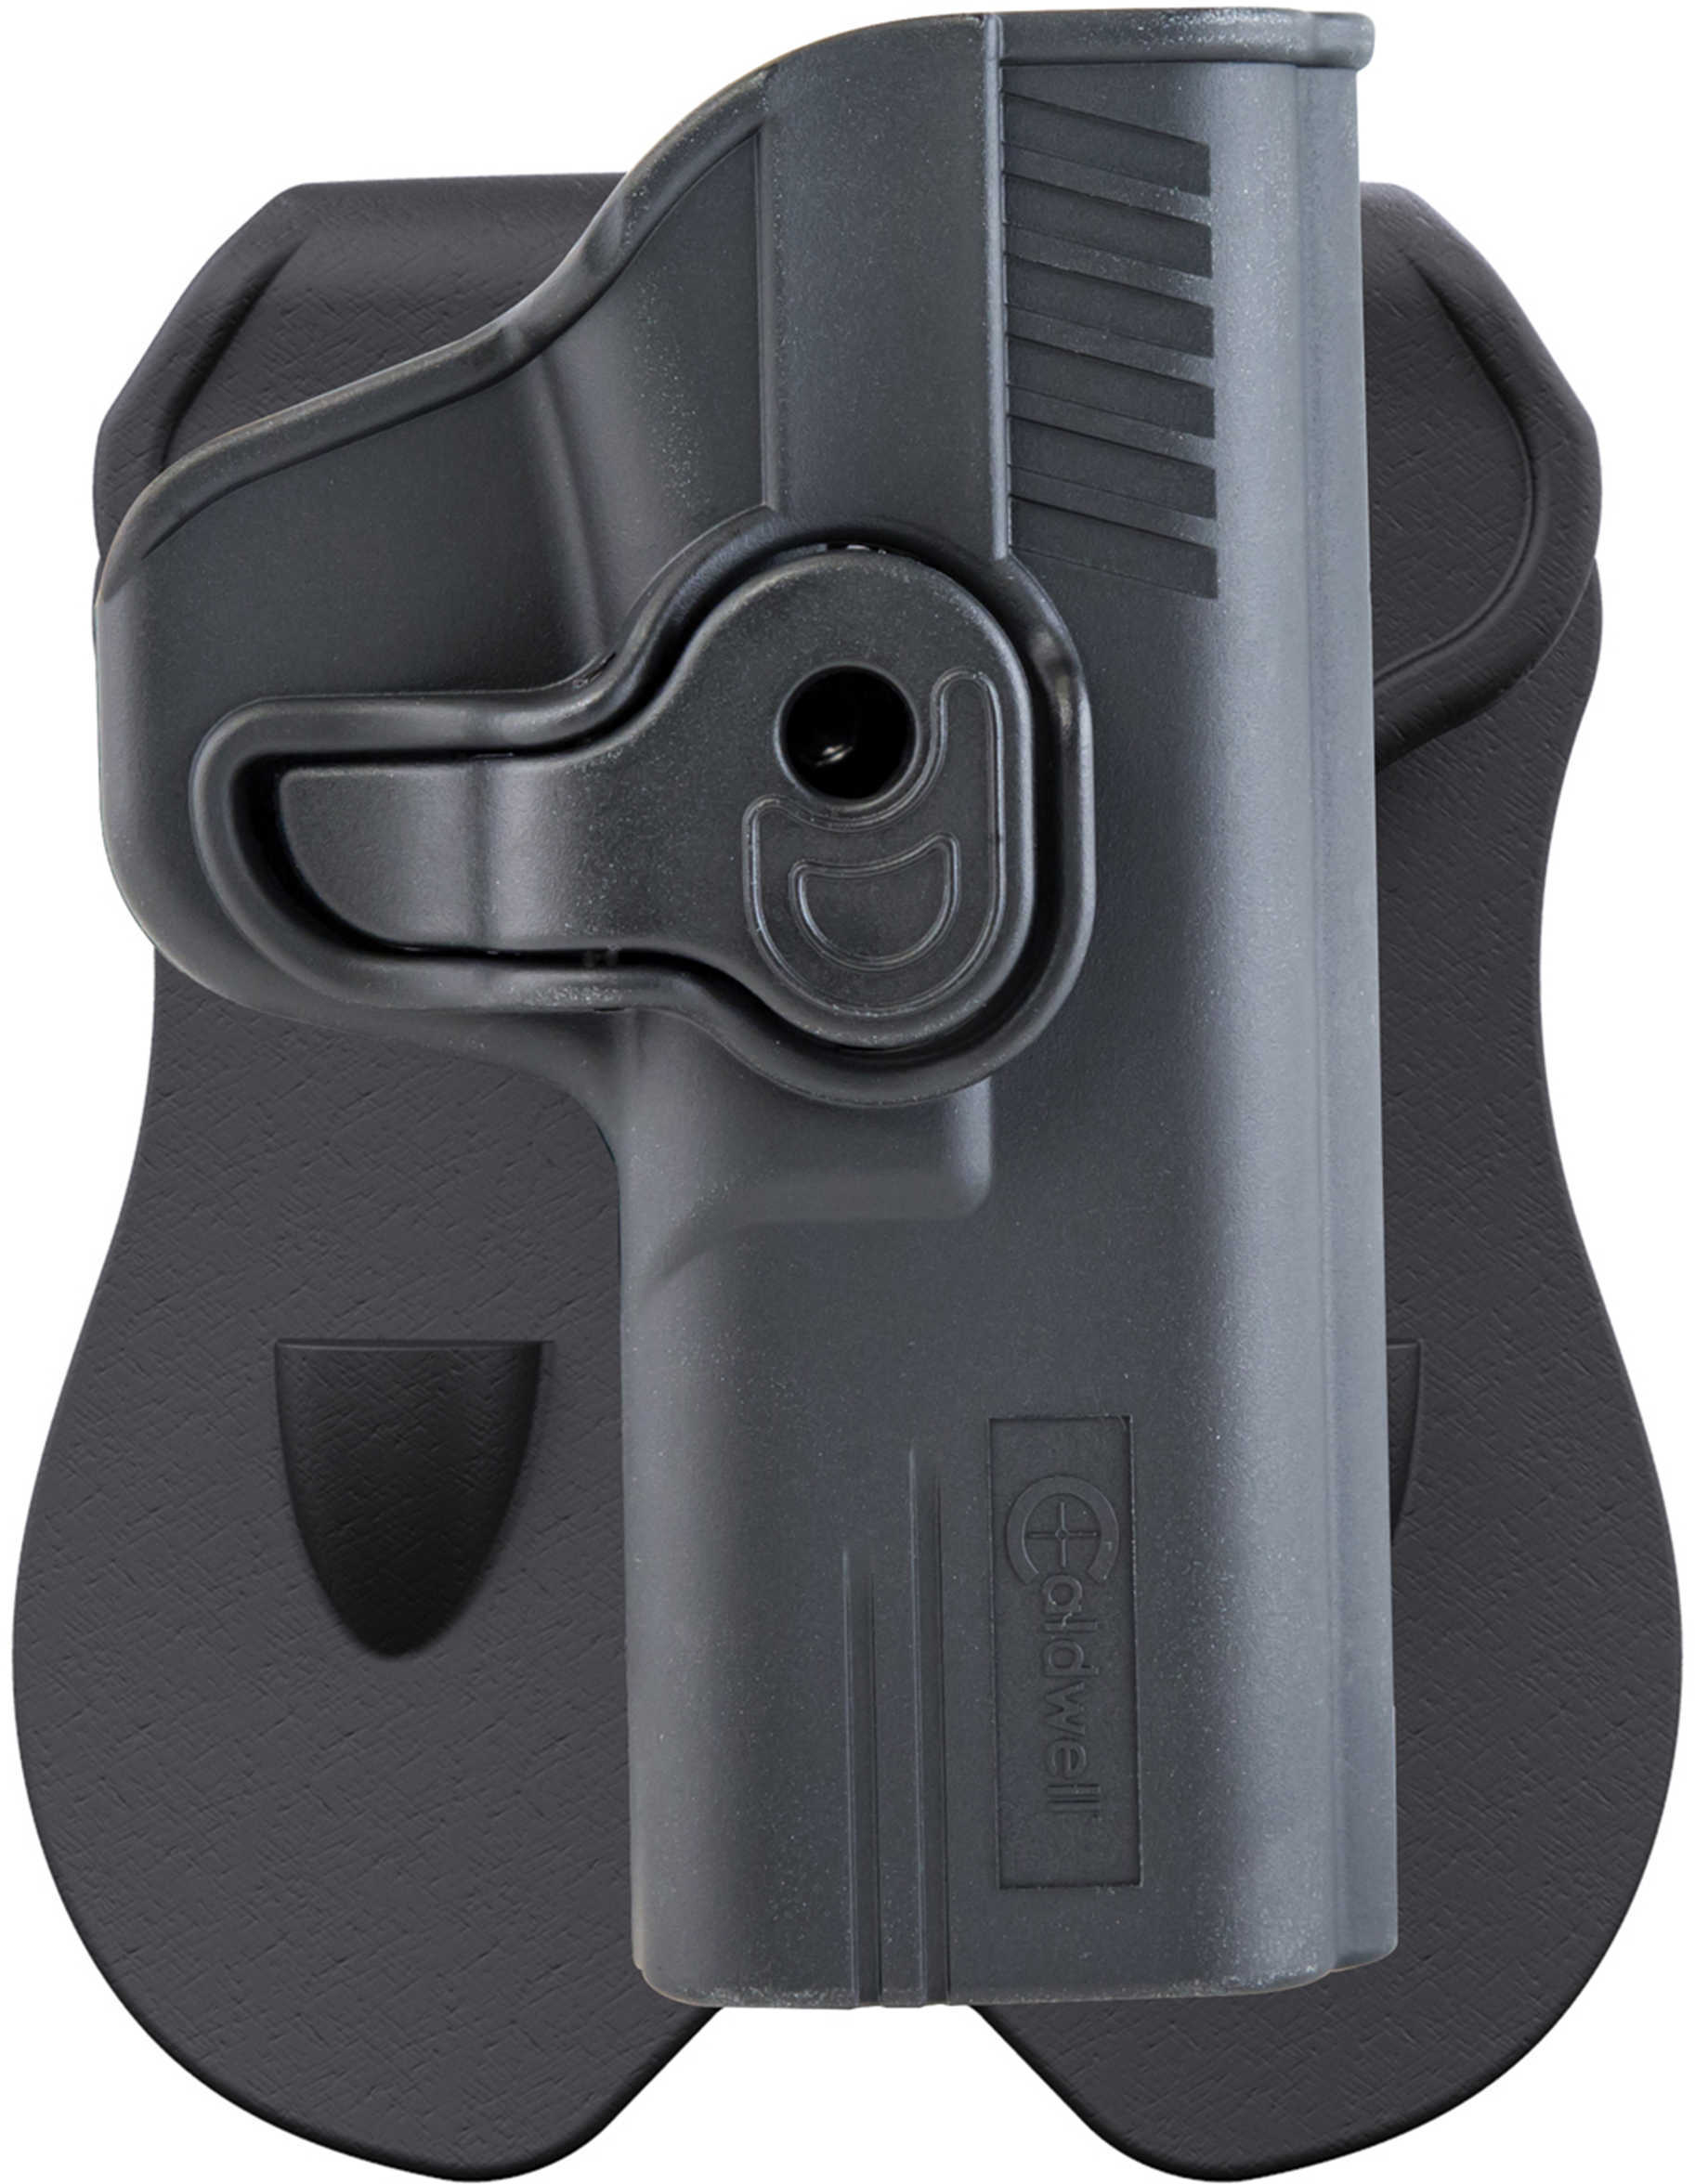 Caldwell Tac Ops Holster 1911 3" Barrel, Right Hand, Black Md: 110067